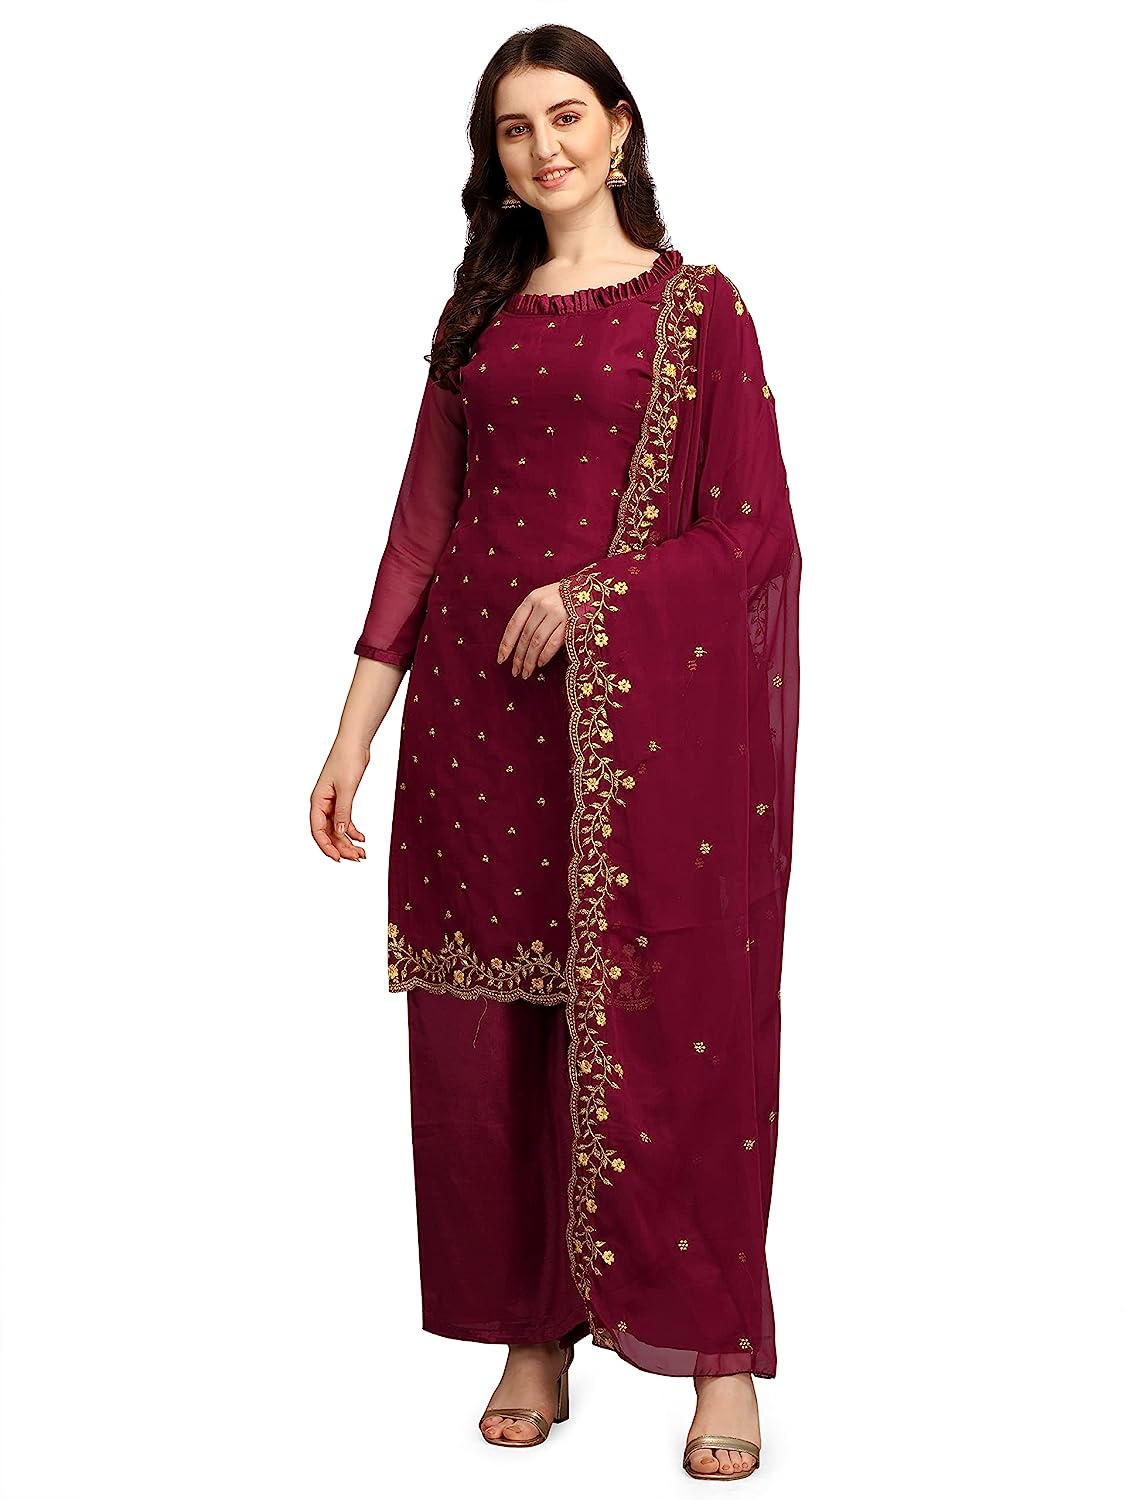 EthnicJunction Women's Georgette Embroidered Unstitched Salwar Suit Dress Material -  Salwar Suits in Sri Lanka from Arcade Online Shopping - Just Rs. 4240!